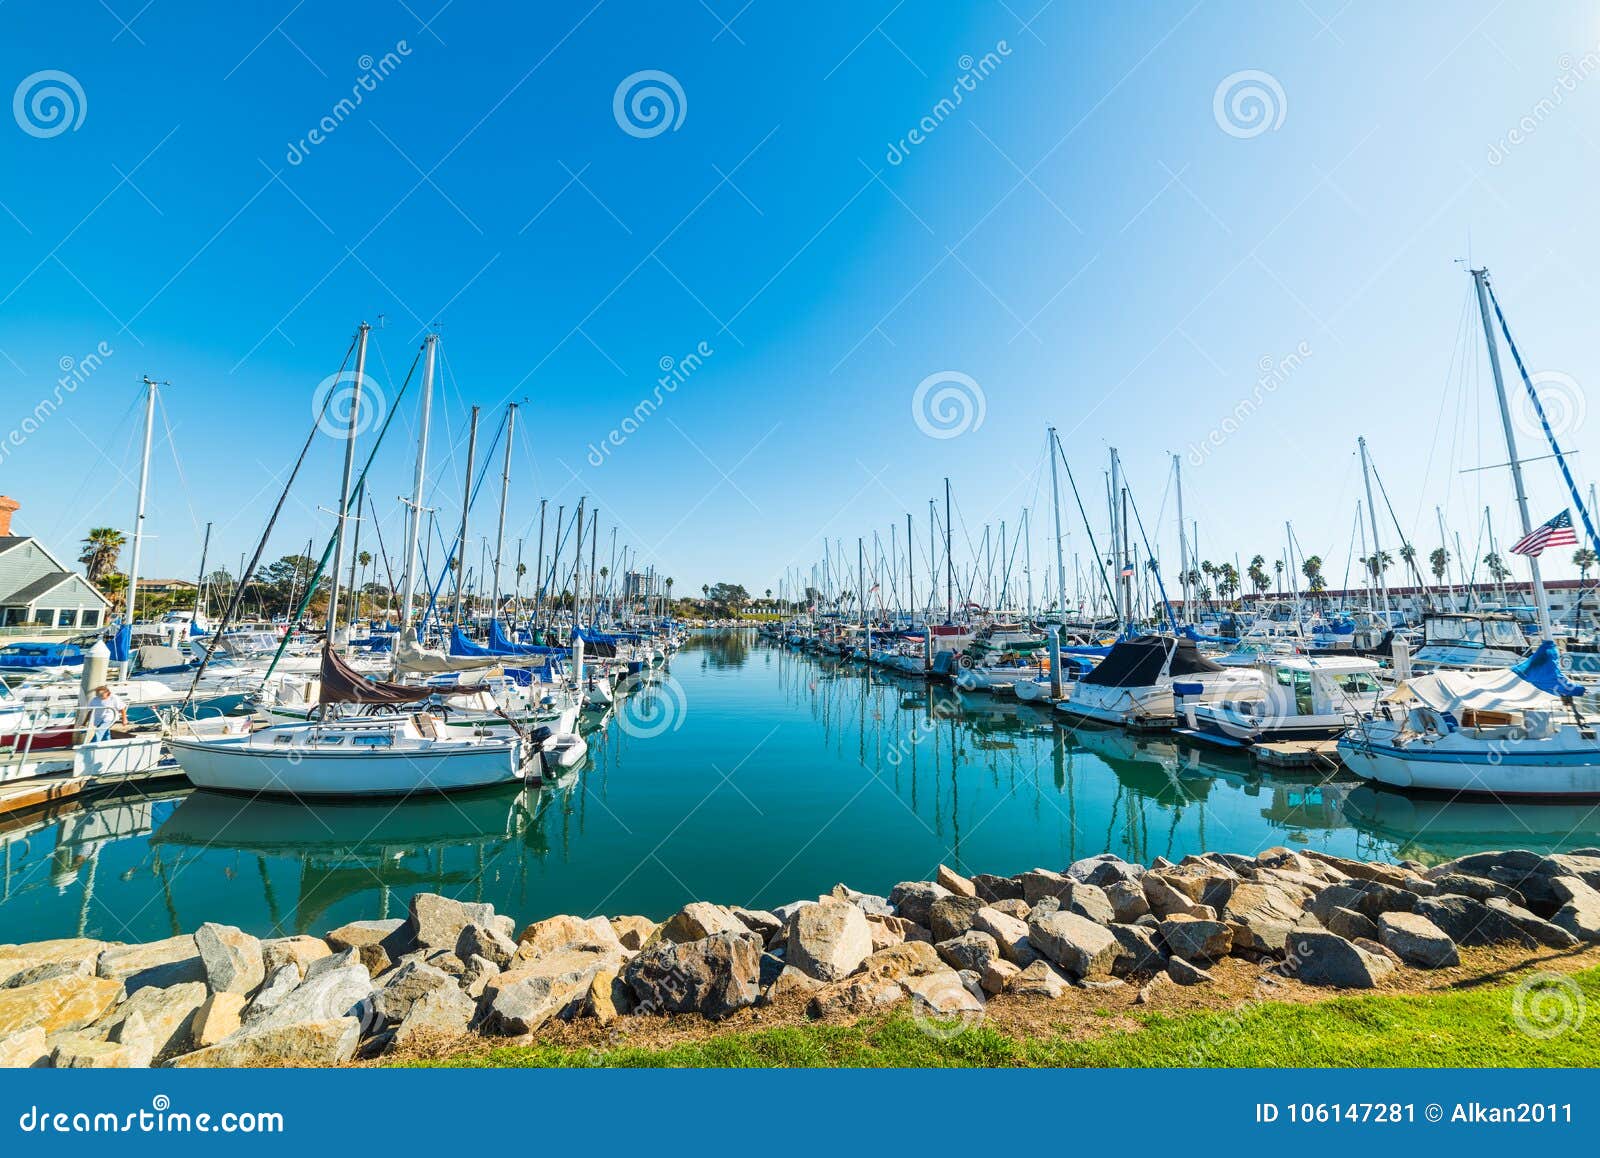 oceanside harbor on a clear day